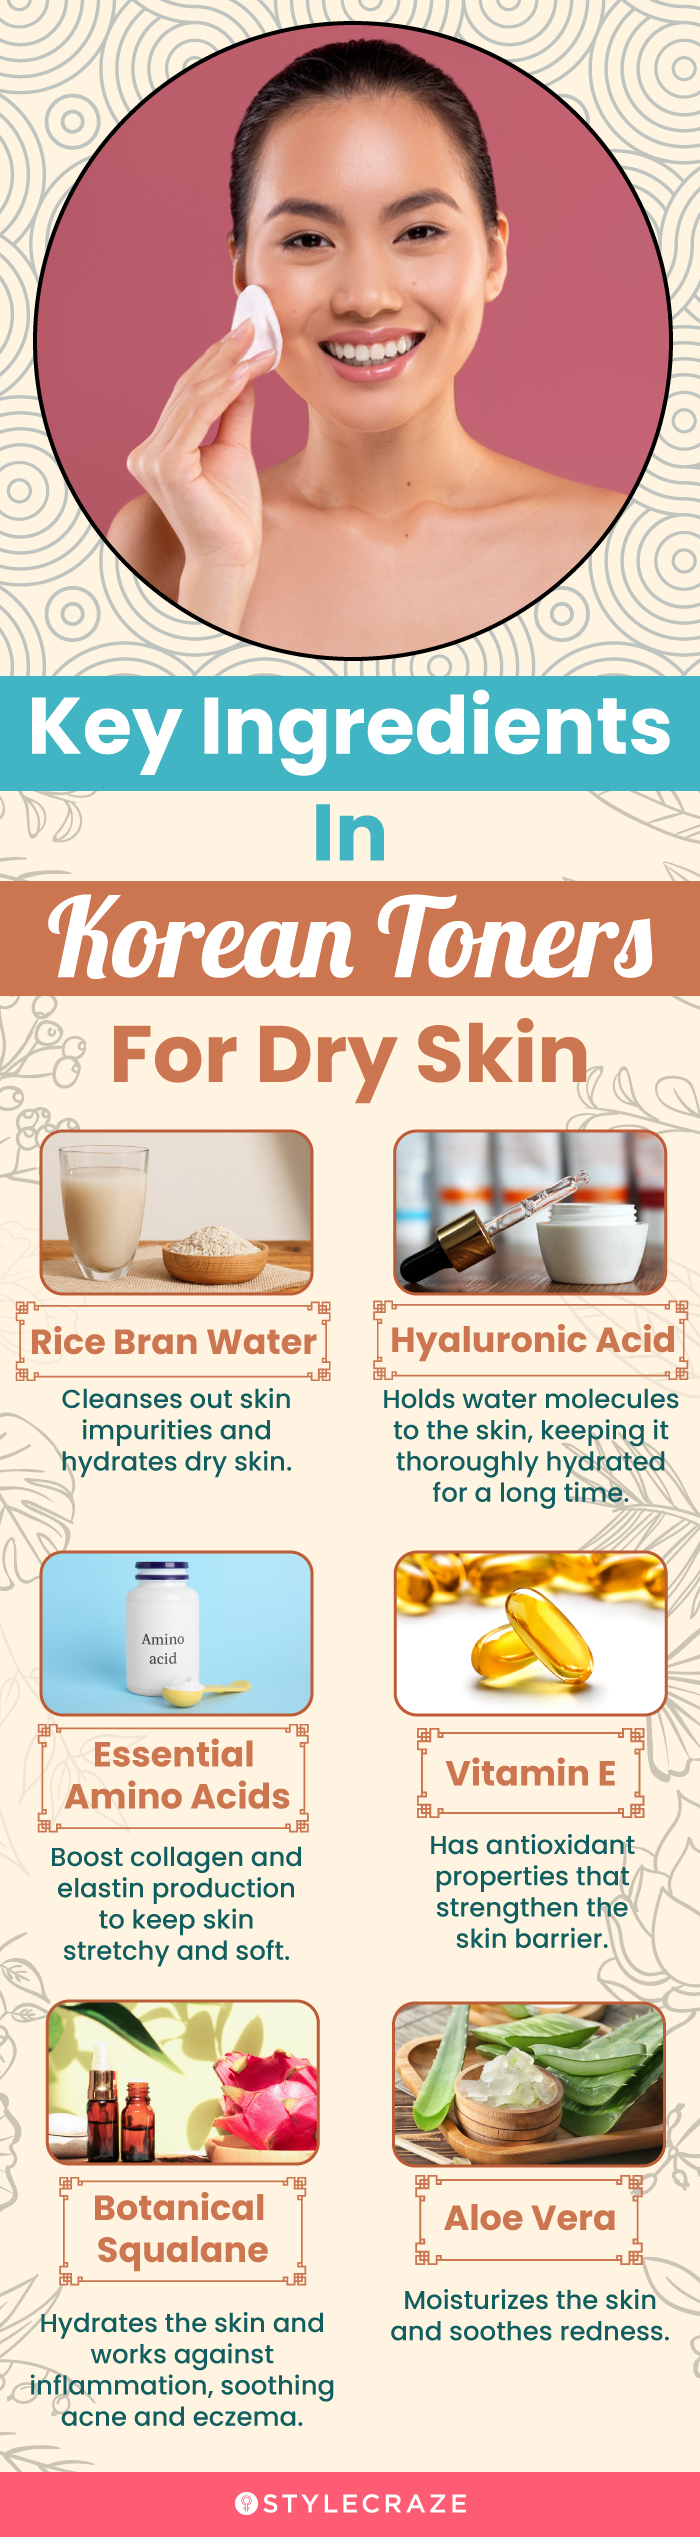 Key Ingredients In Korean Toners For Dry Skin (infographic)